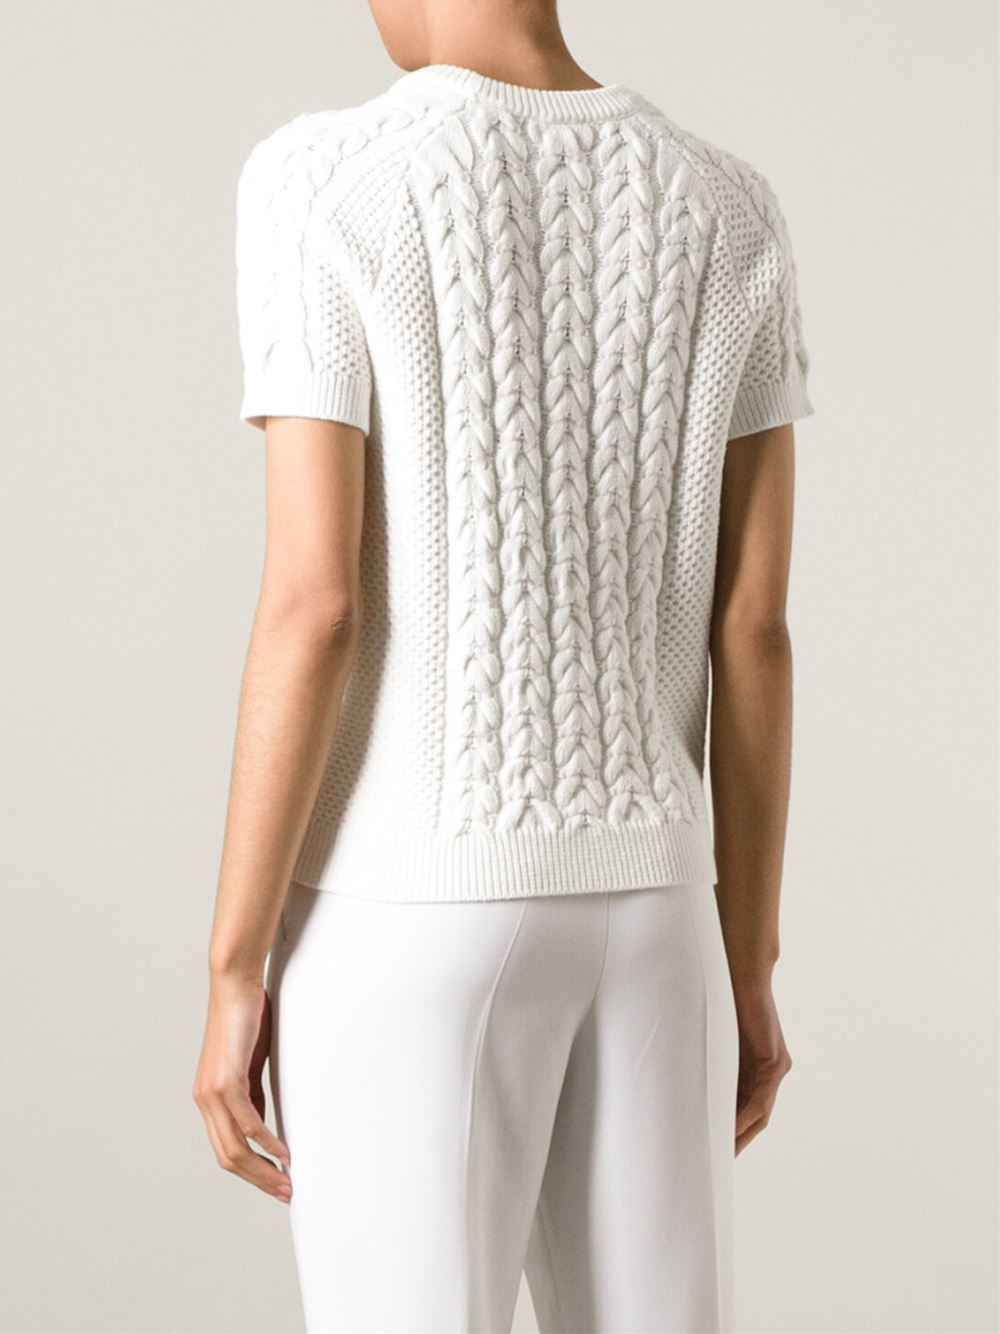 JOSEPH Short Sleeve Cable Knit Sweater in White - Lyst